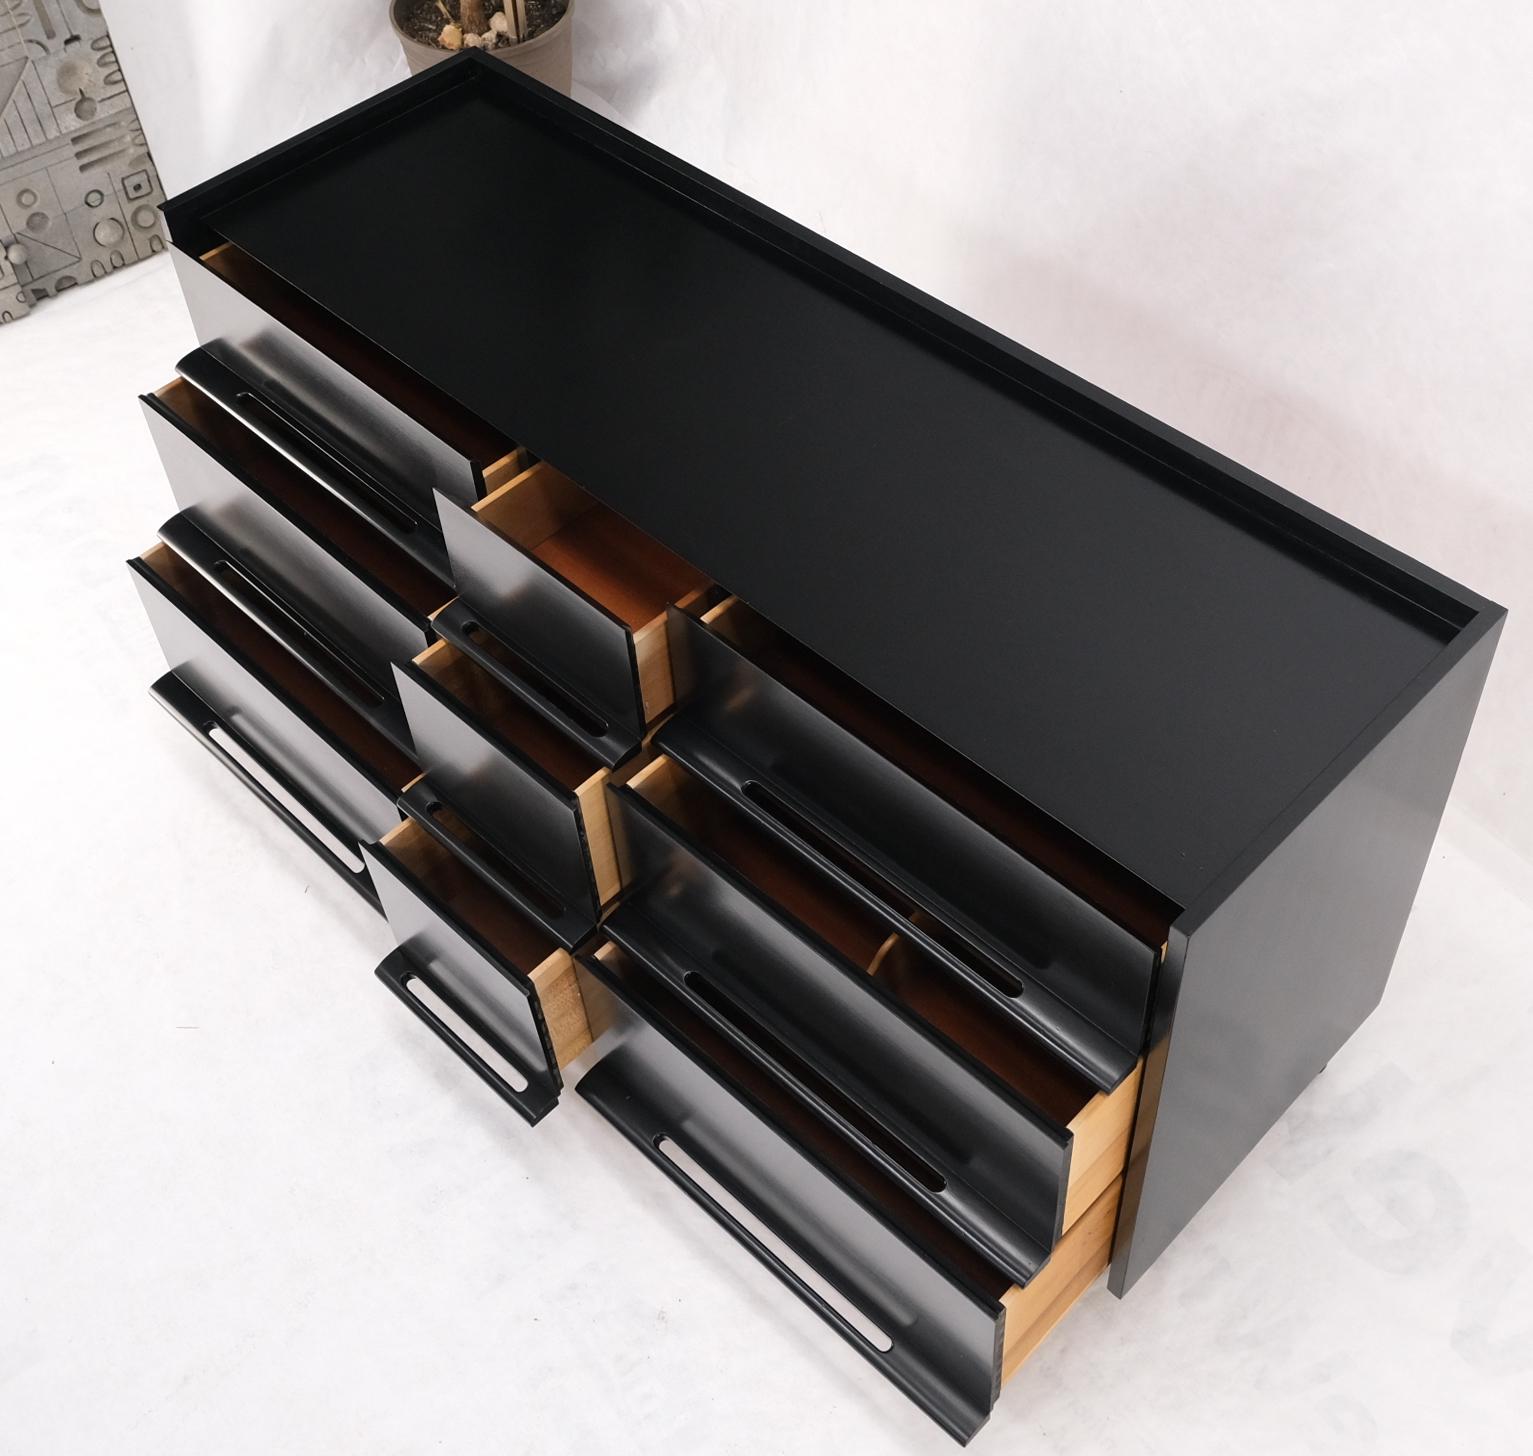 Mahogany Black Lacquer Ebonized Pieced Wood Pulls Gallery Top 9 Drawers Dresser Credenza For Sale